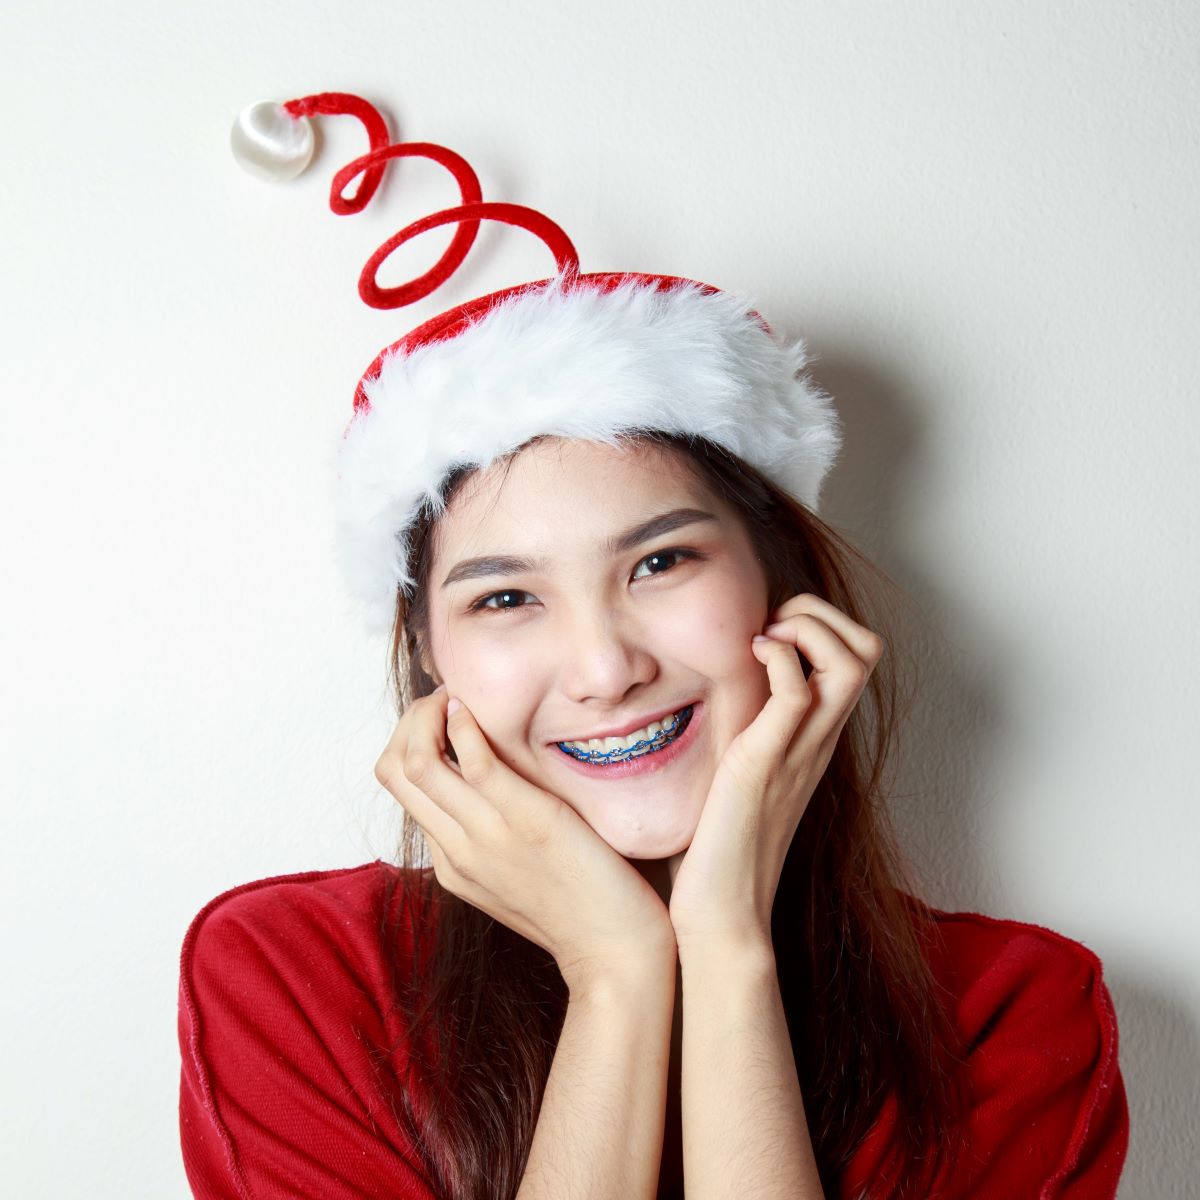 Girl with South Houston braces smiling for the holidays in Santa hat.